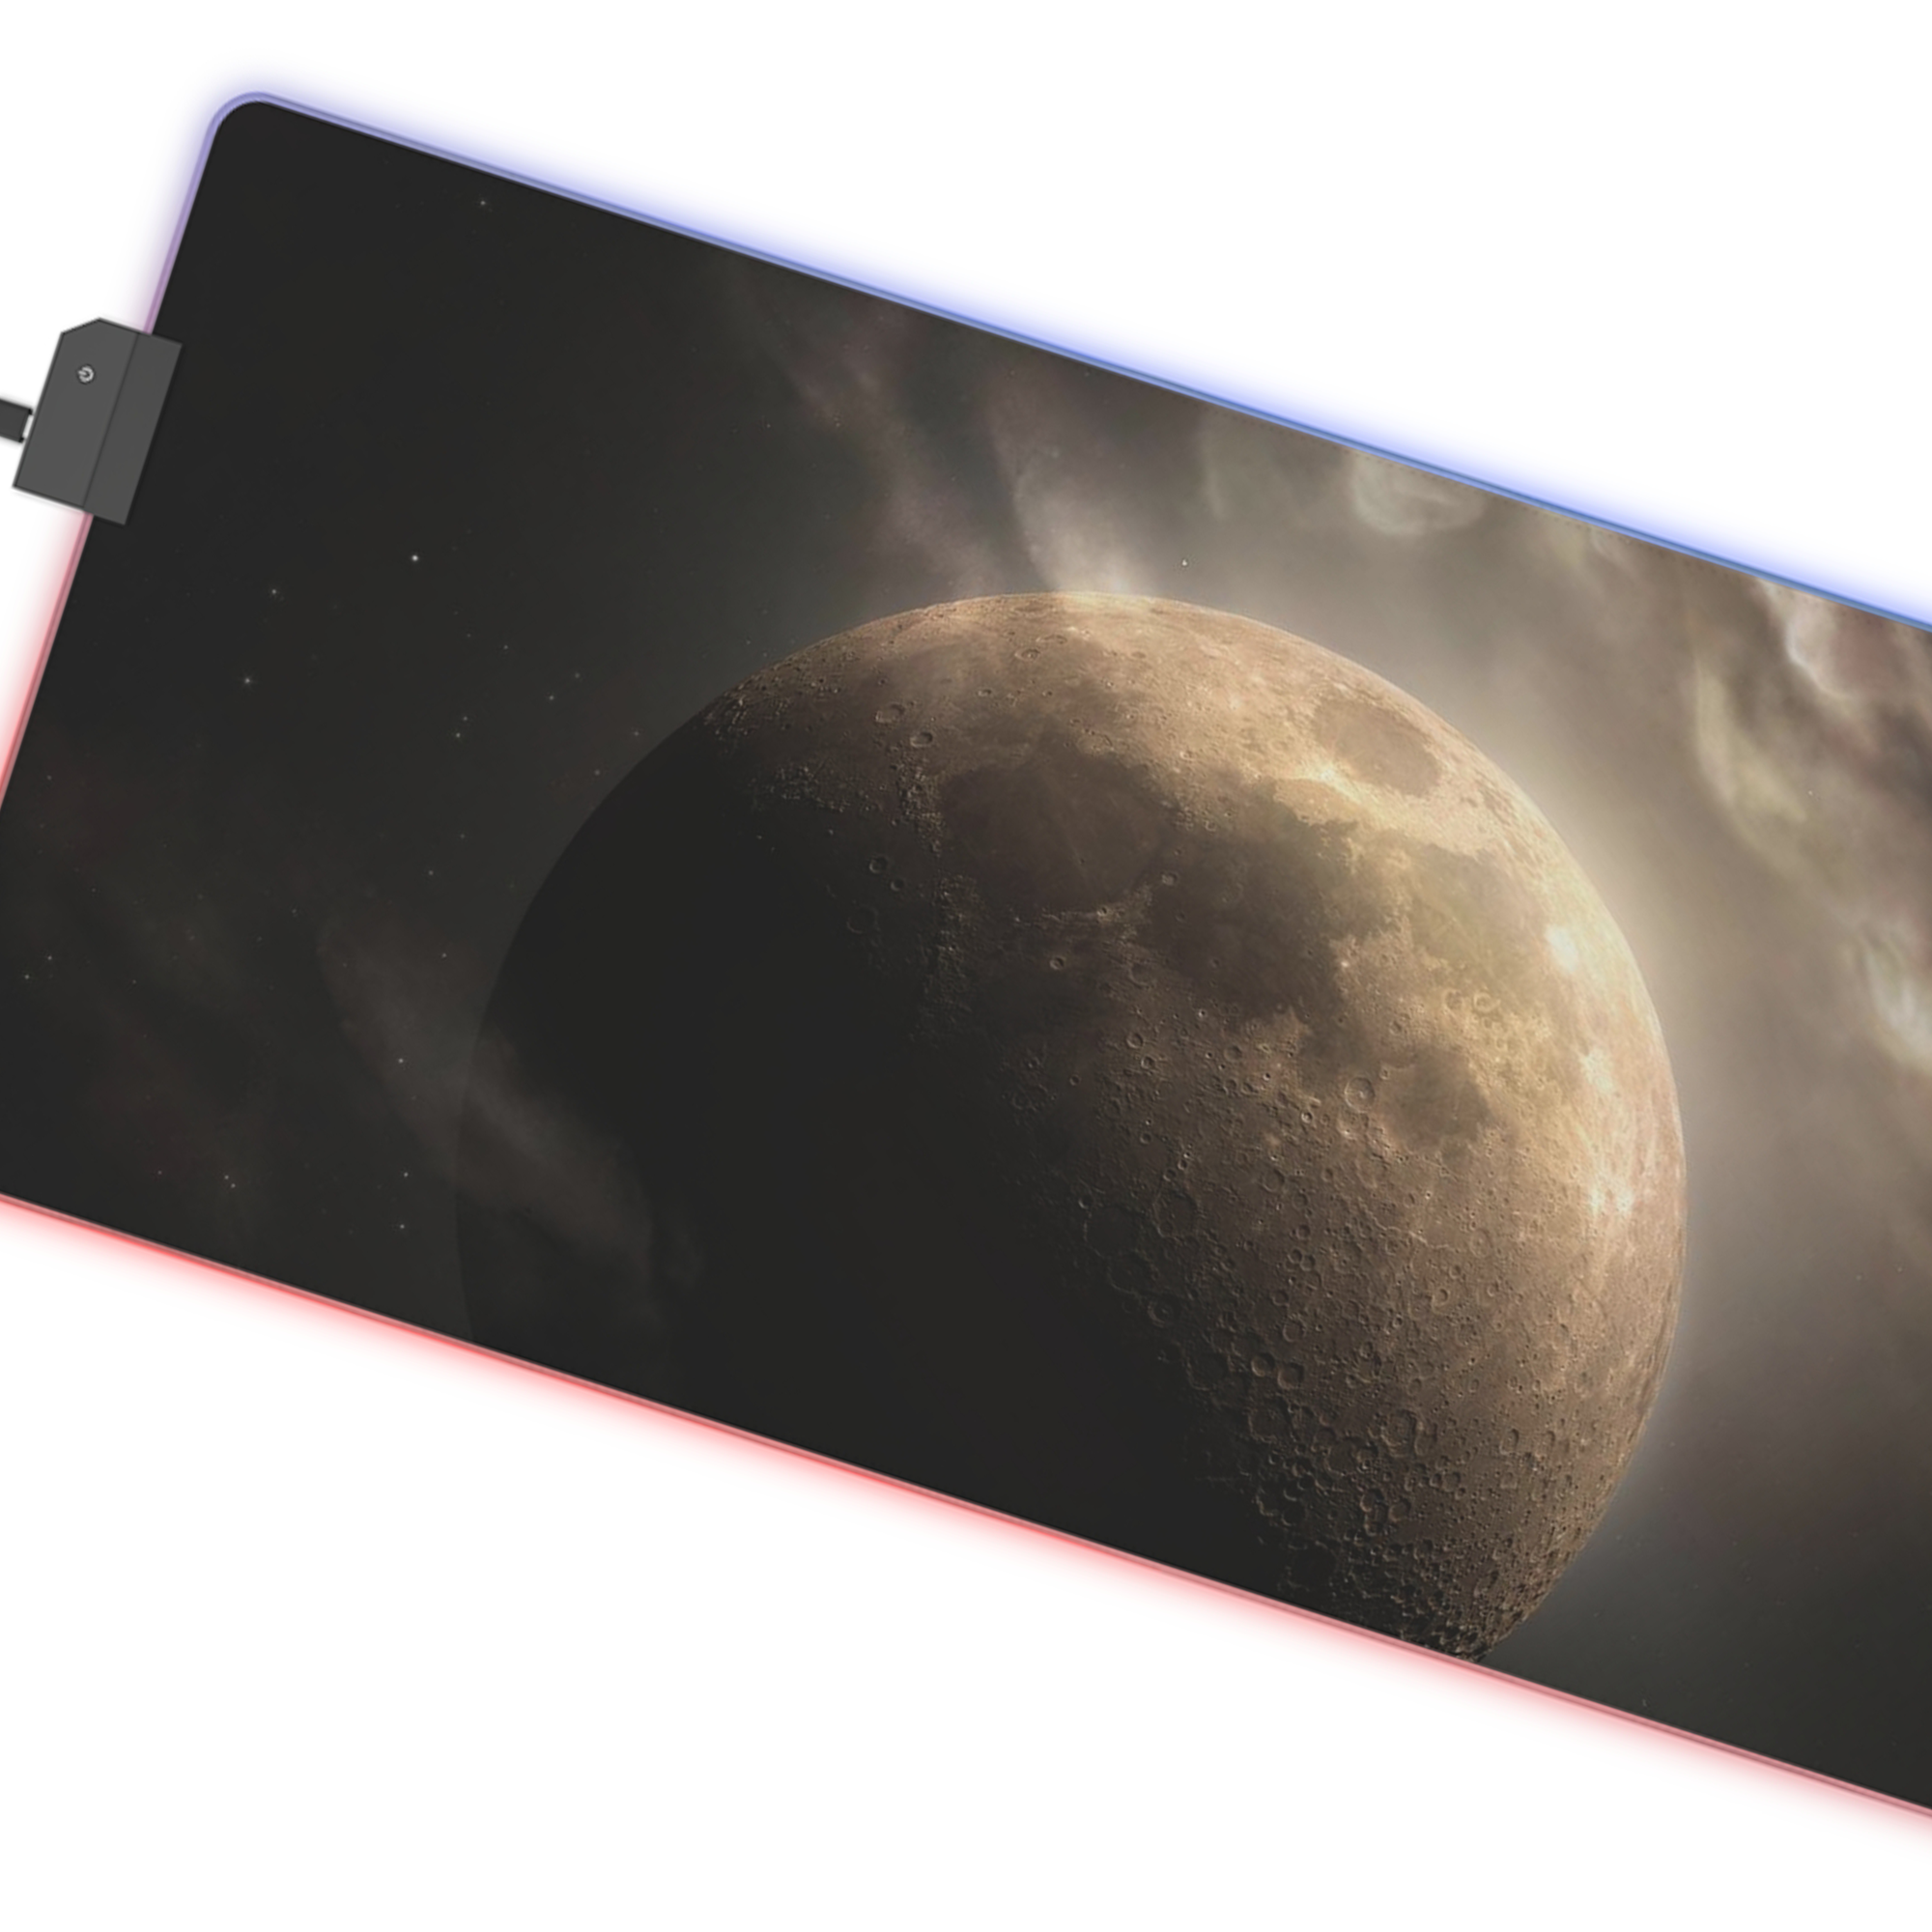 Darkness & Light LED Gaming Mouse Pad